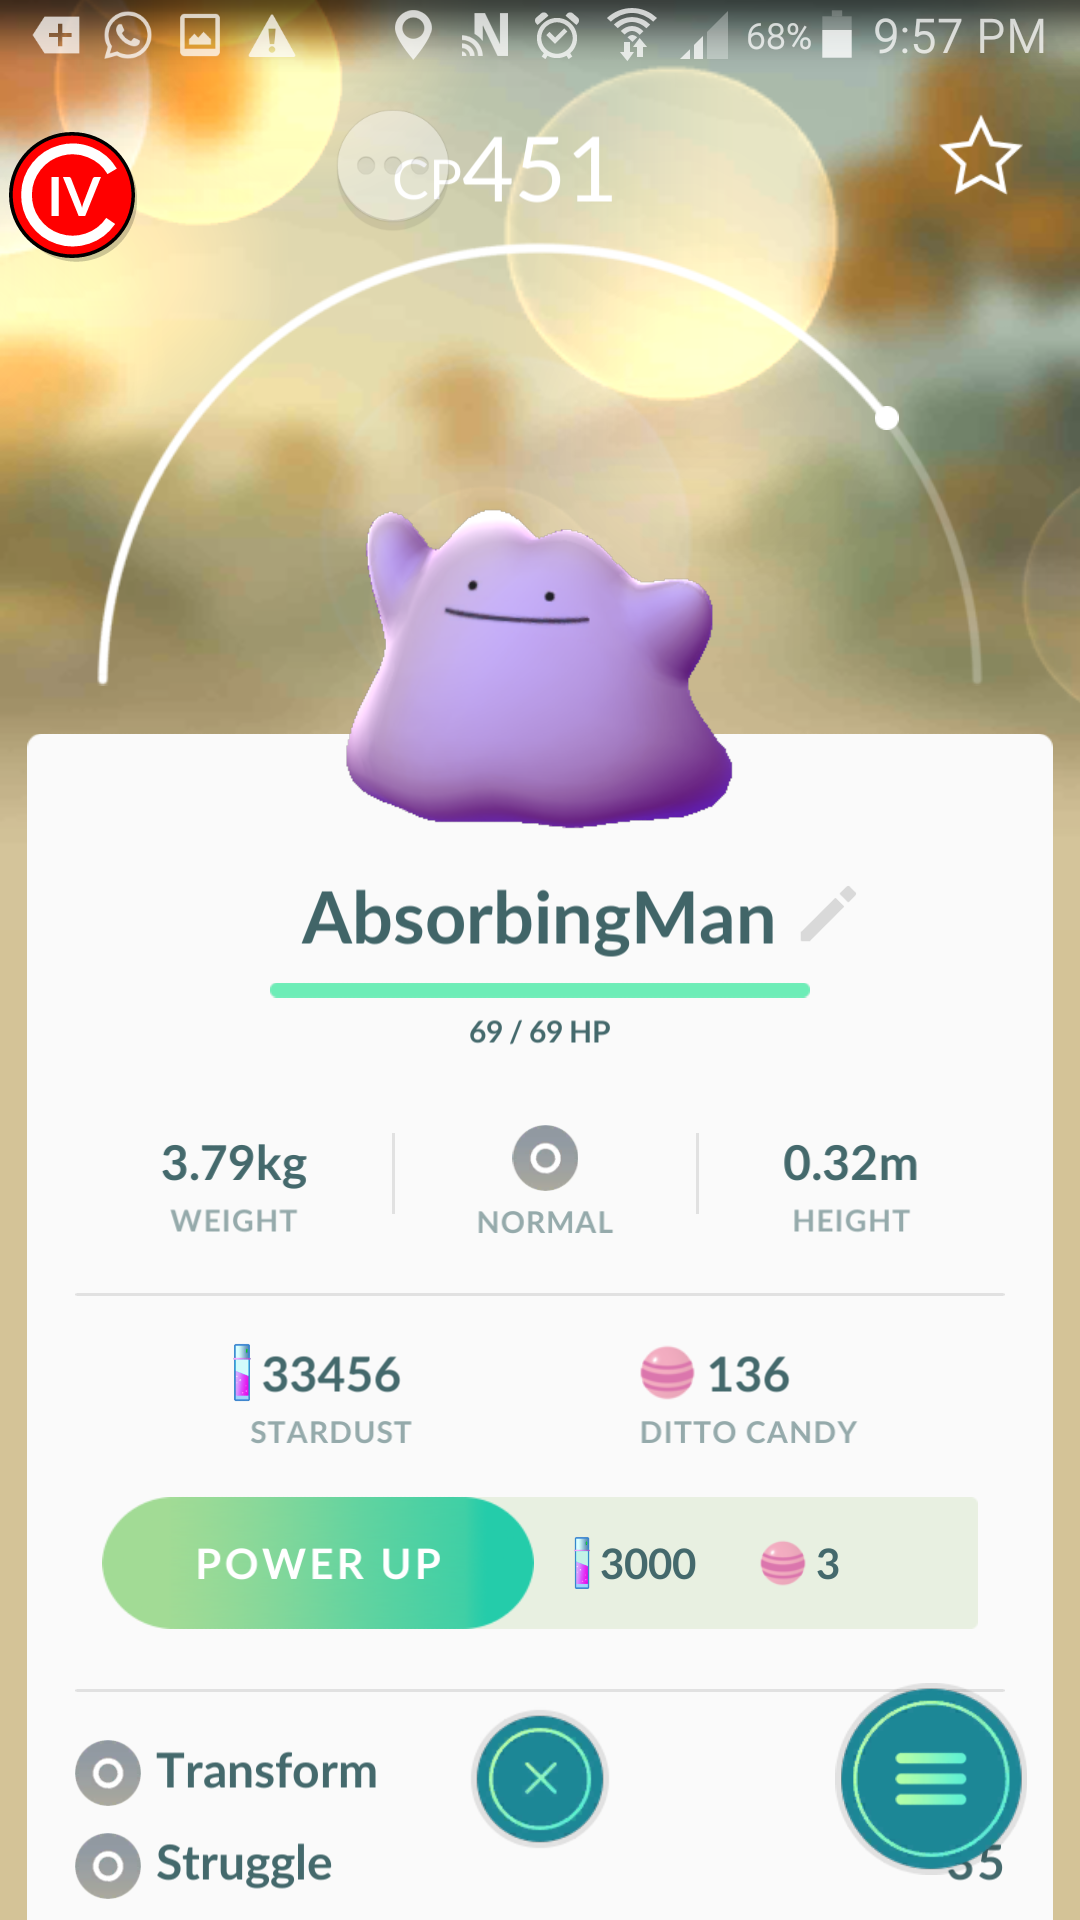 How rare is this 100% iv Ditto?